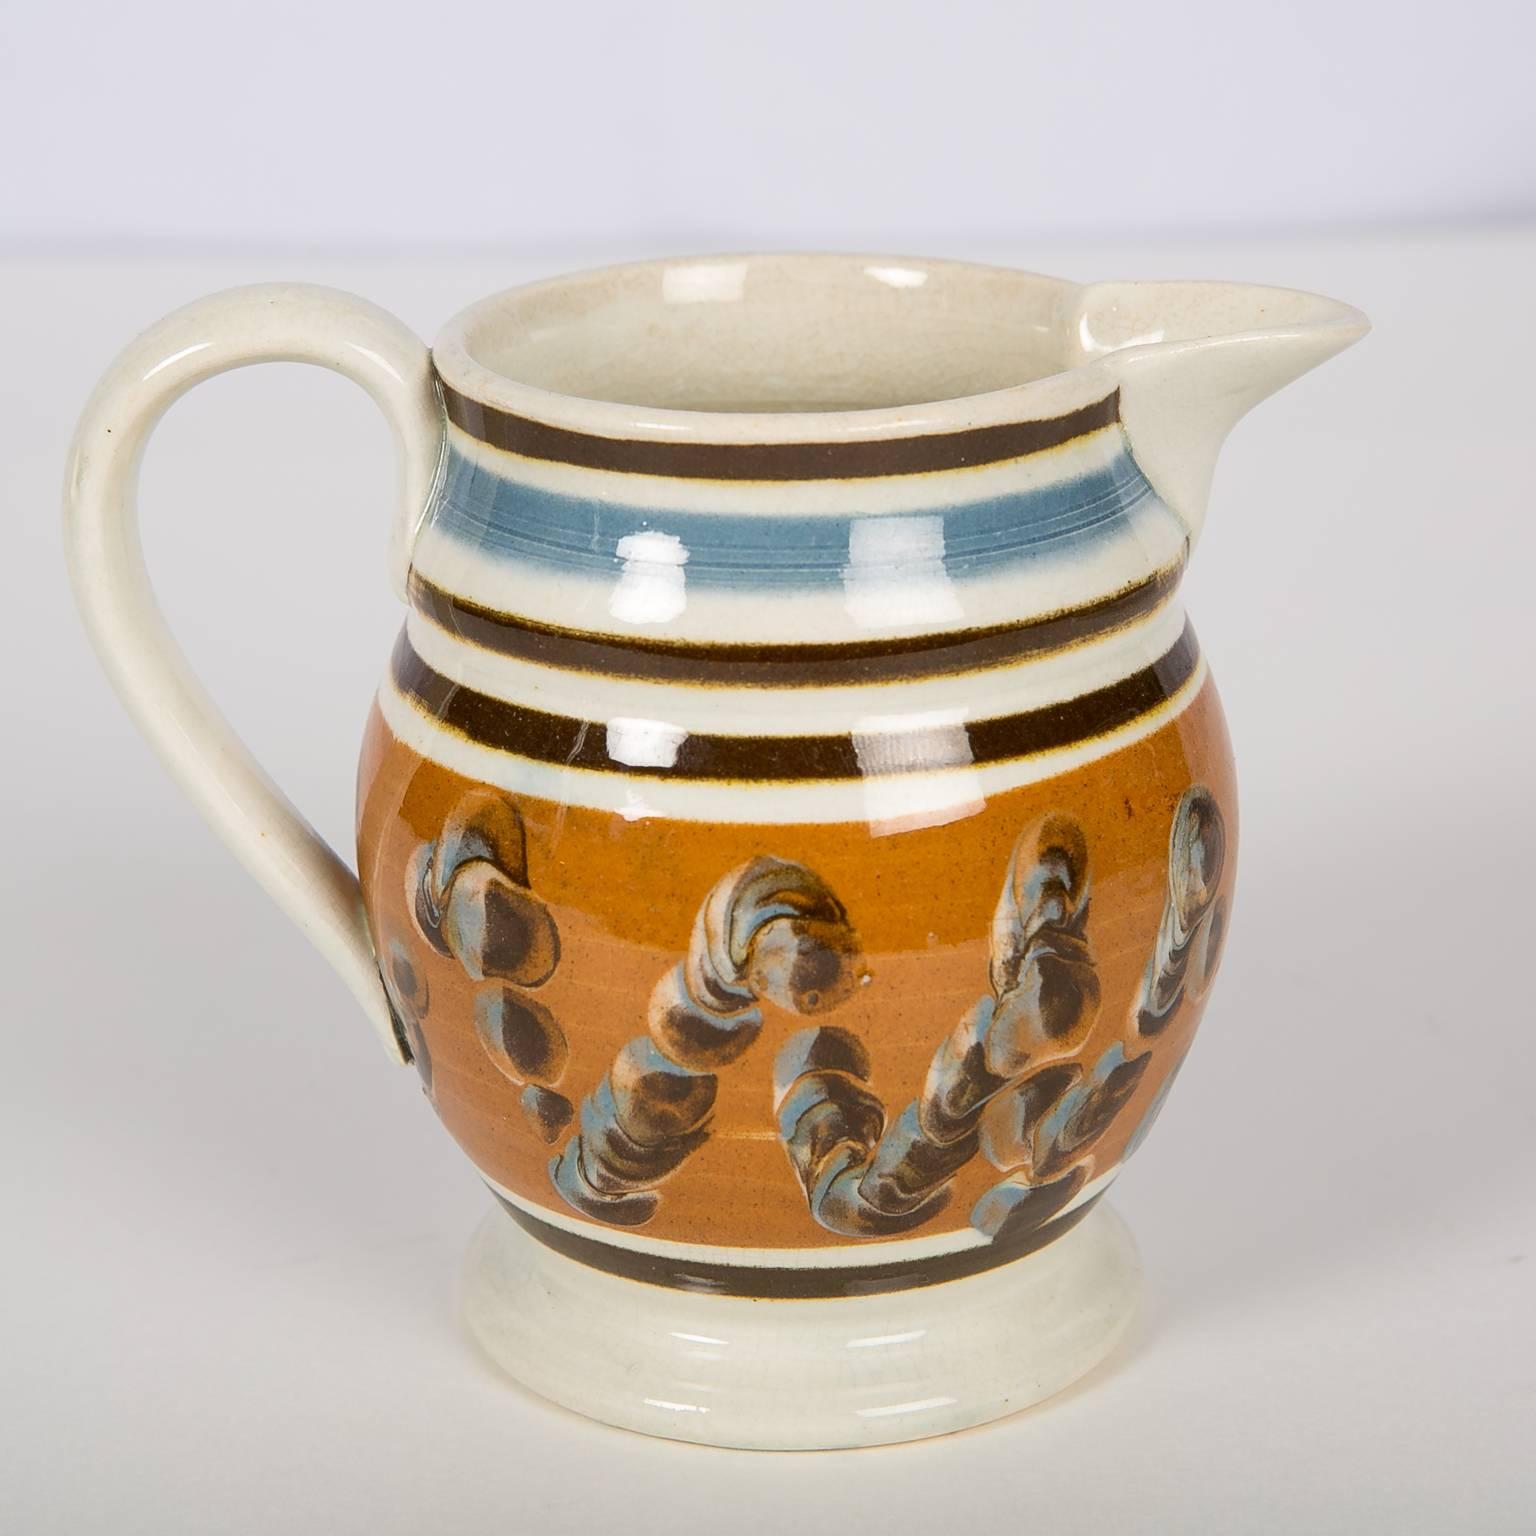 19th Century Mocha Ware Pitcher Decorated with a Cable Pattern